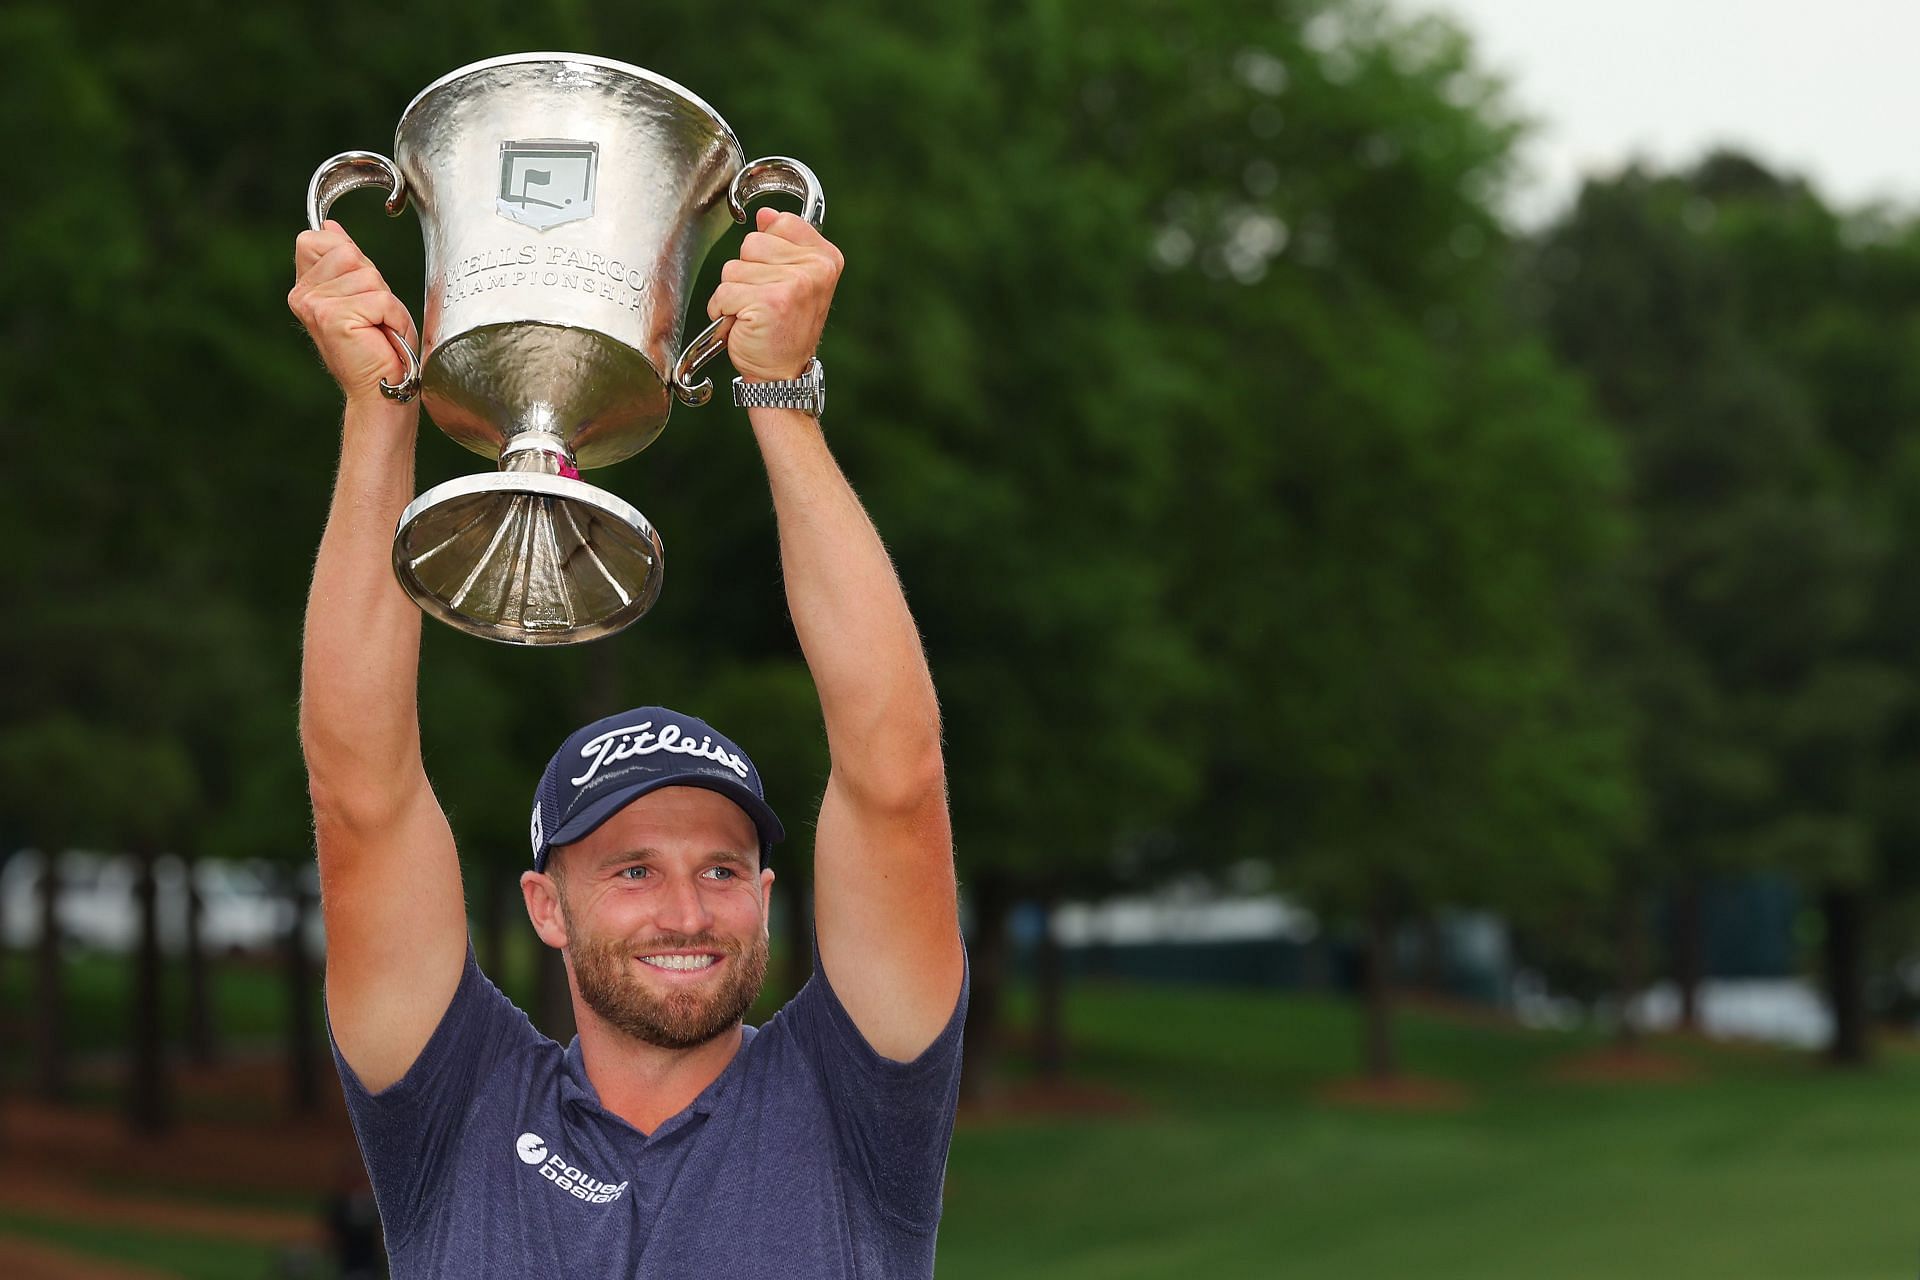 How much did Wyndham Clark win at the 2023 Wells Fargo Championship